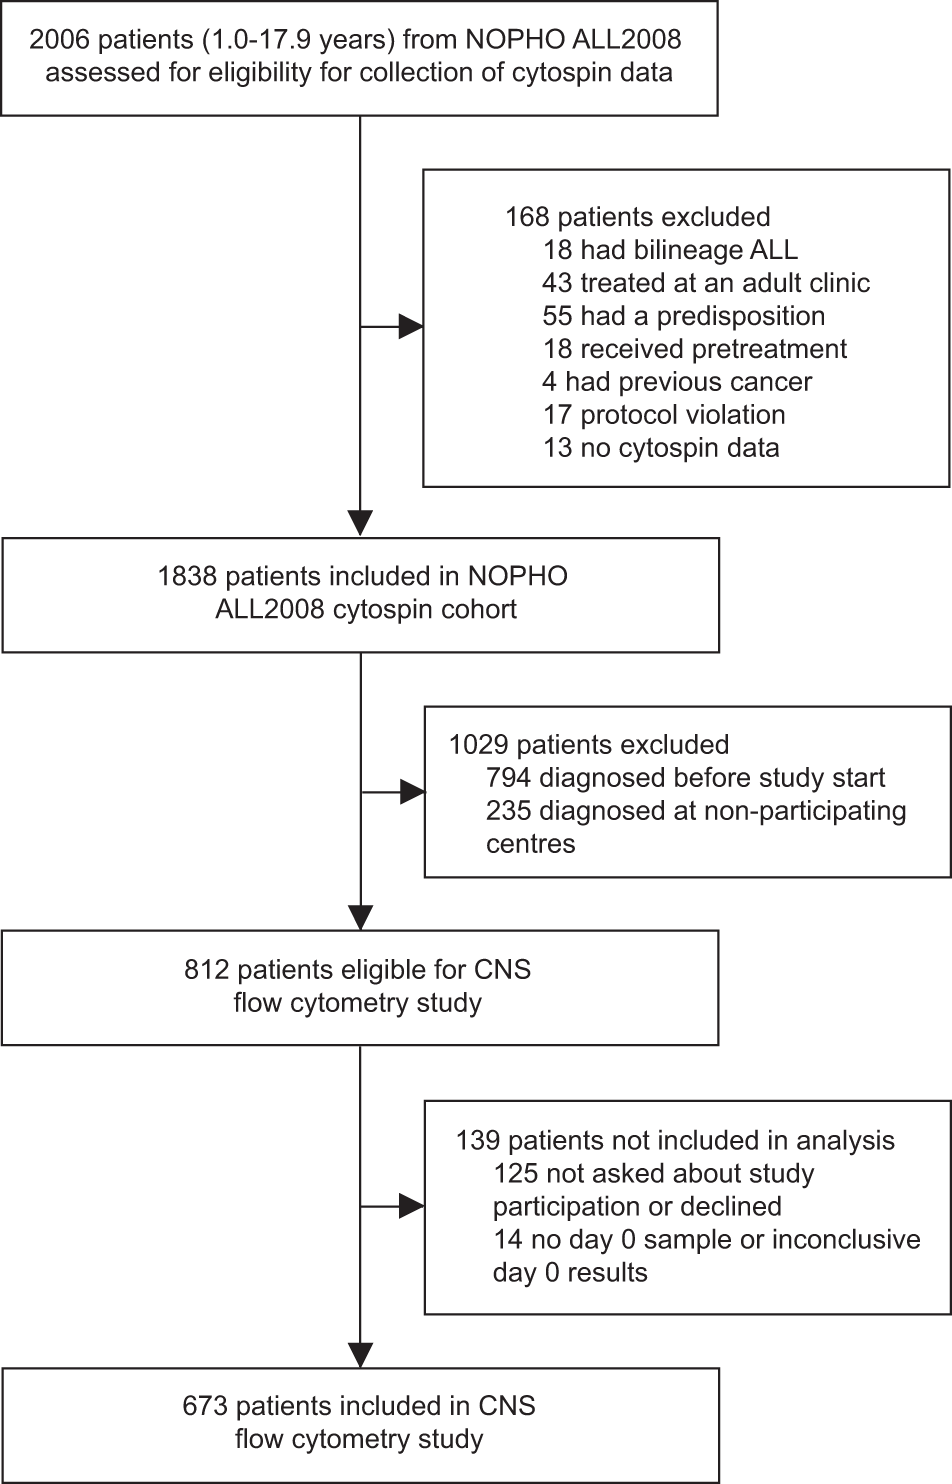 Flow cytometric detection of leukemic blasts in cerebrospinal fluid predicts risk of relapse in childhood acute lymphoblastic leukemia a Nordic Society of Pediatric Hematology and Oncology study Leukemia